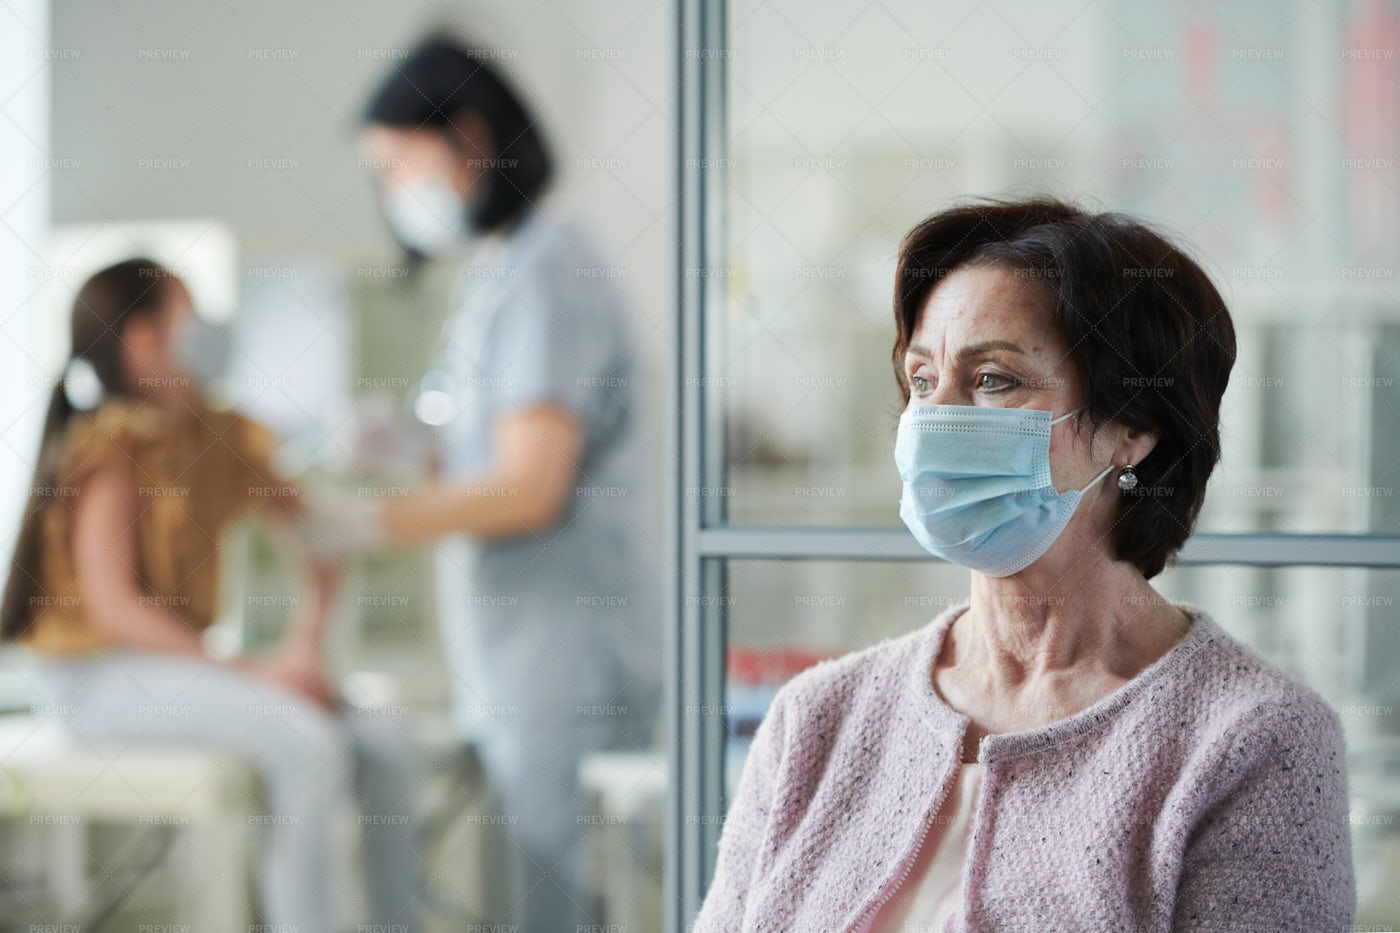 Woman In Face Mask In The Queue: Stock Photos